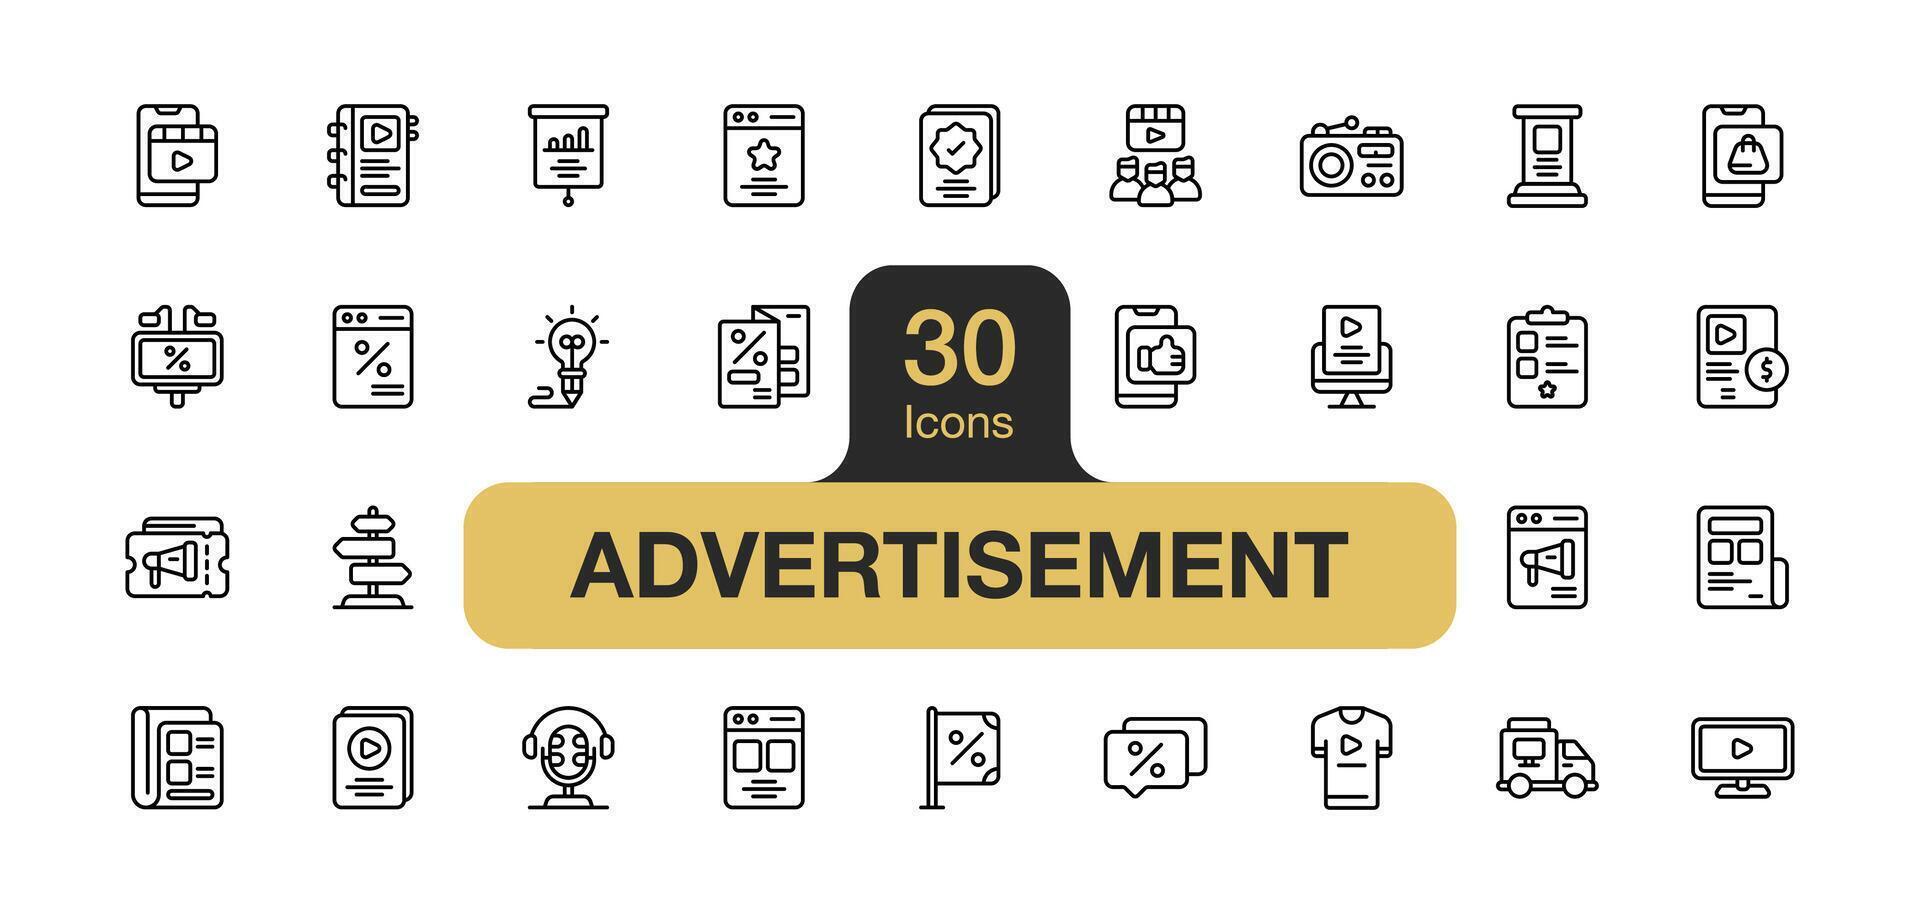 Set of 30 Advertisement icon element sets. Includes advertising, browser, podcast, marketing, billboard, and More. Outline icons vector collection.